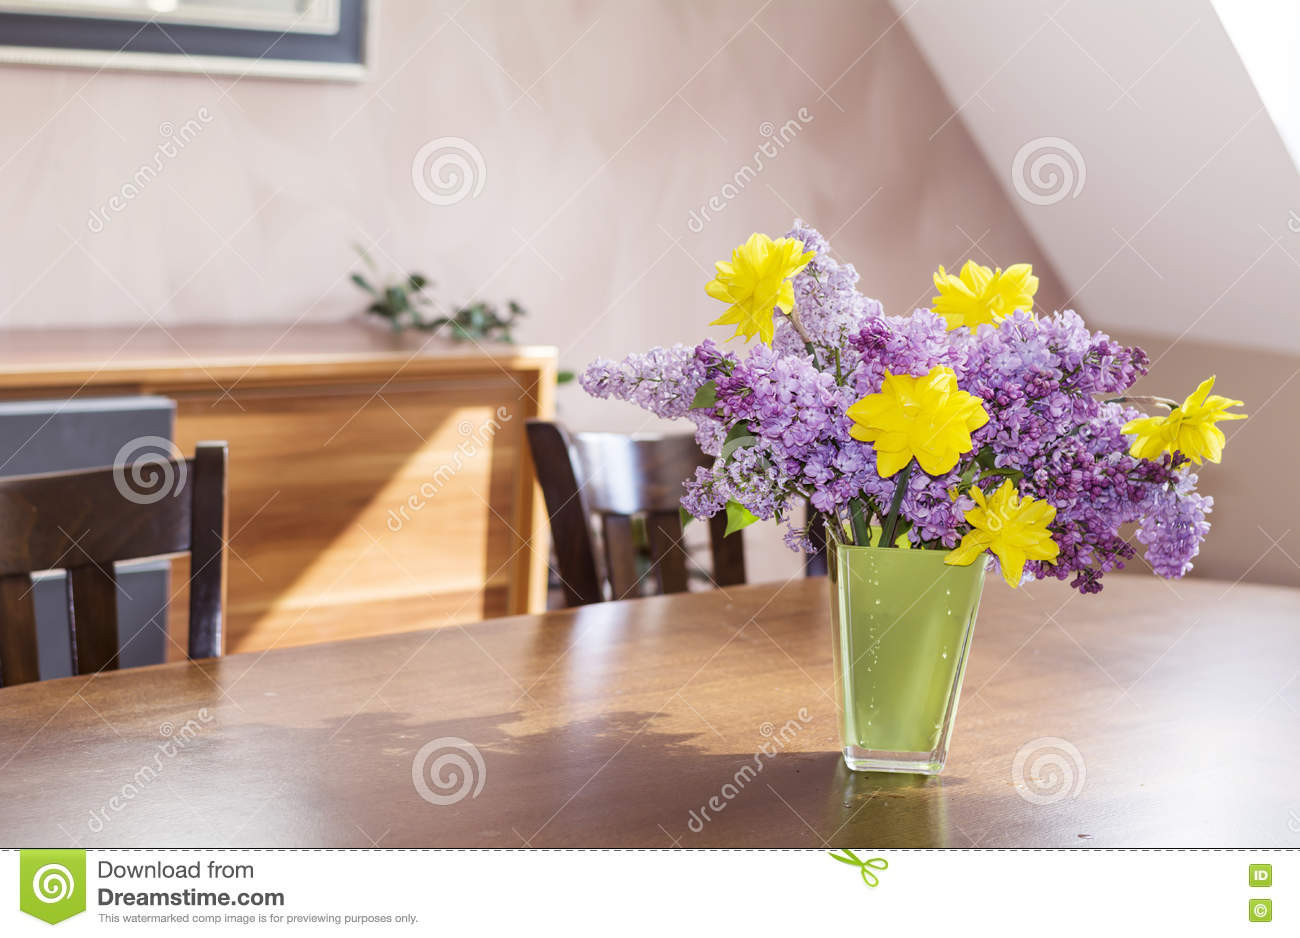 24 Lovely French Country Vases 2024 free download french country vases of wood and glass vase photograph yellow narcissus flowers and lilac in with regard to wood and glass vase photograph yellow narcissus flowers and lilac in a green glass